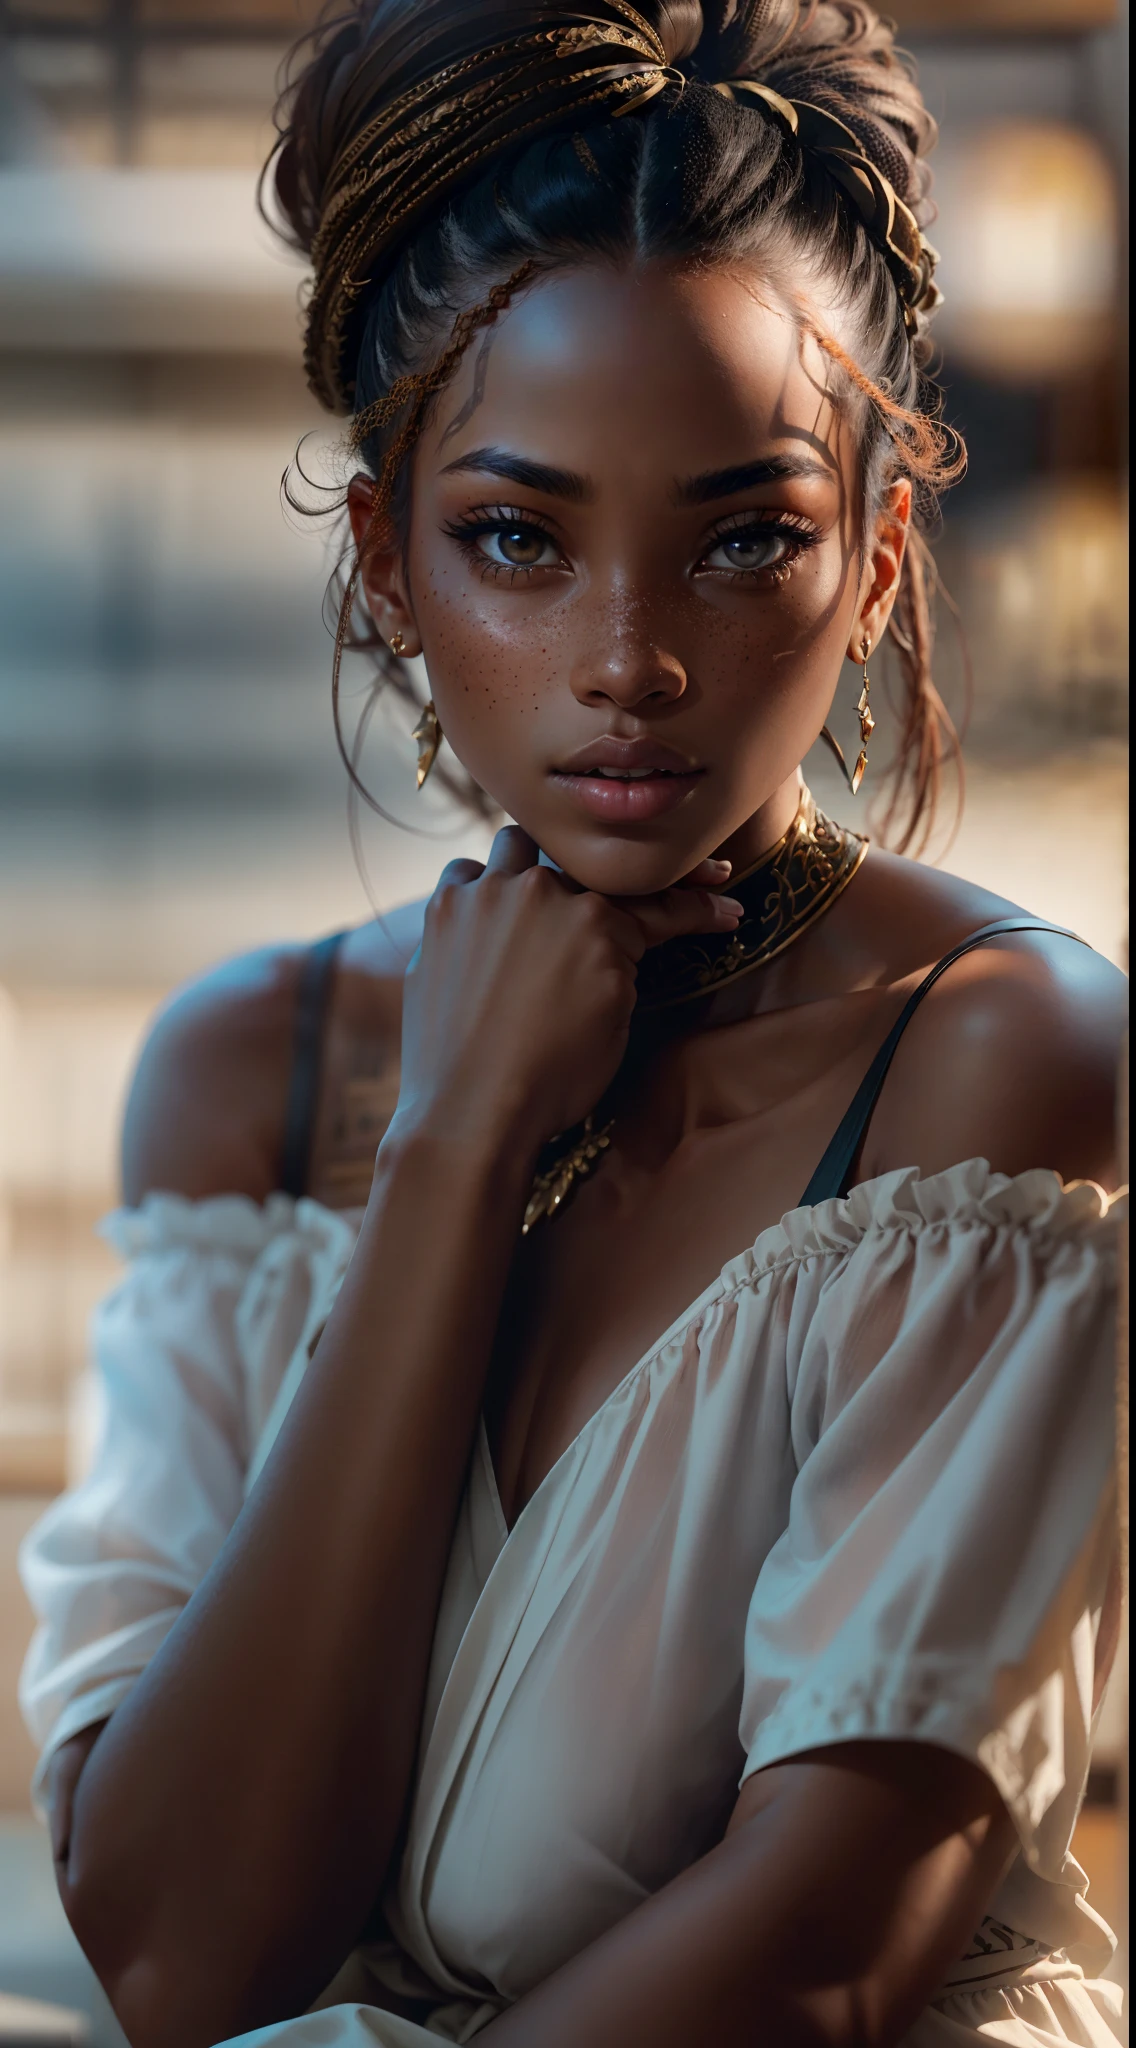 An exquisite portrait of a Black African woman with deep ebony skin, the photograph captured in stunning 8k resolution and raw format to preserve the highest quality of details. The woman's beauty is undeniable, her face commanding the frame in a close-up shot that reveals the intricate details of her eyes. She wears a dress that complements her radiant skin, and her eyes are portrayed with meticulous attention to detail, showcasing the captivating depth within. The photograph is taken with a lens that emphasizes the defiance in her gaze, and the backdrop is a dark studio setting that enhances the muted colors of the scene. The lighting and shadows are expertly crafted to bring out the richness of her skin tone and the subtle nuances of her features. Her ginger hair, with its distinct hue, adds a touch of warmth and contrast against her ebony skin. The interior setting adds a sense of intimacy, while the freckles on her skin tell their own story. The overall composition captures her essence with authenticity and grace, creating a portrait that is a celebration of her heritage and beauty. Photography by defiance512, utilizing the best techniques for shadow and lighting, to create a mesmerizing portrayal that transcends the visual.